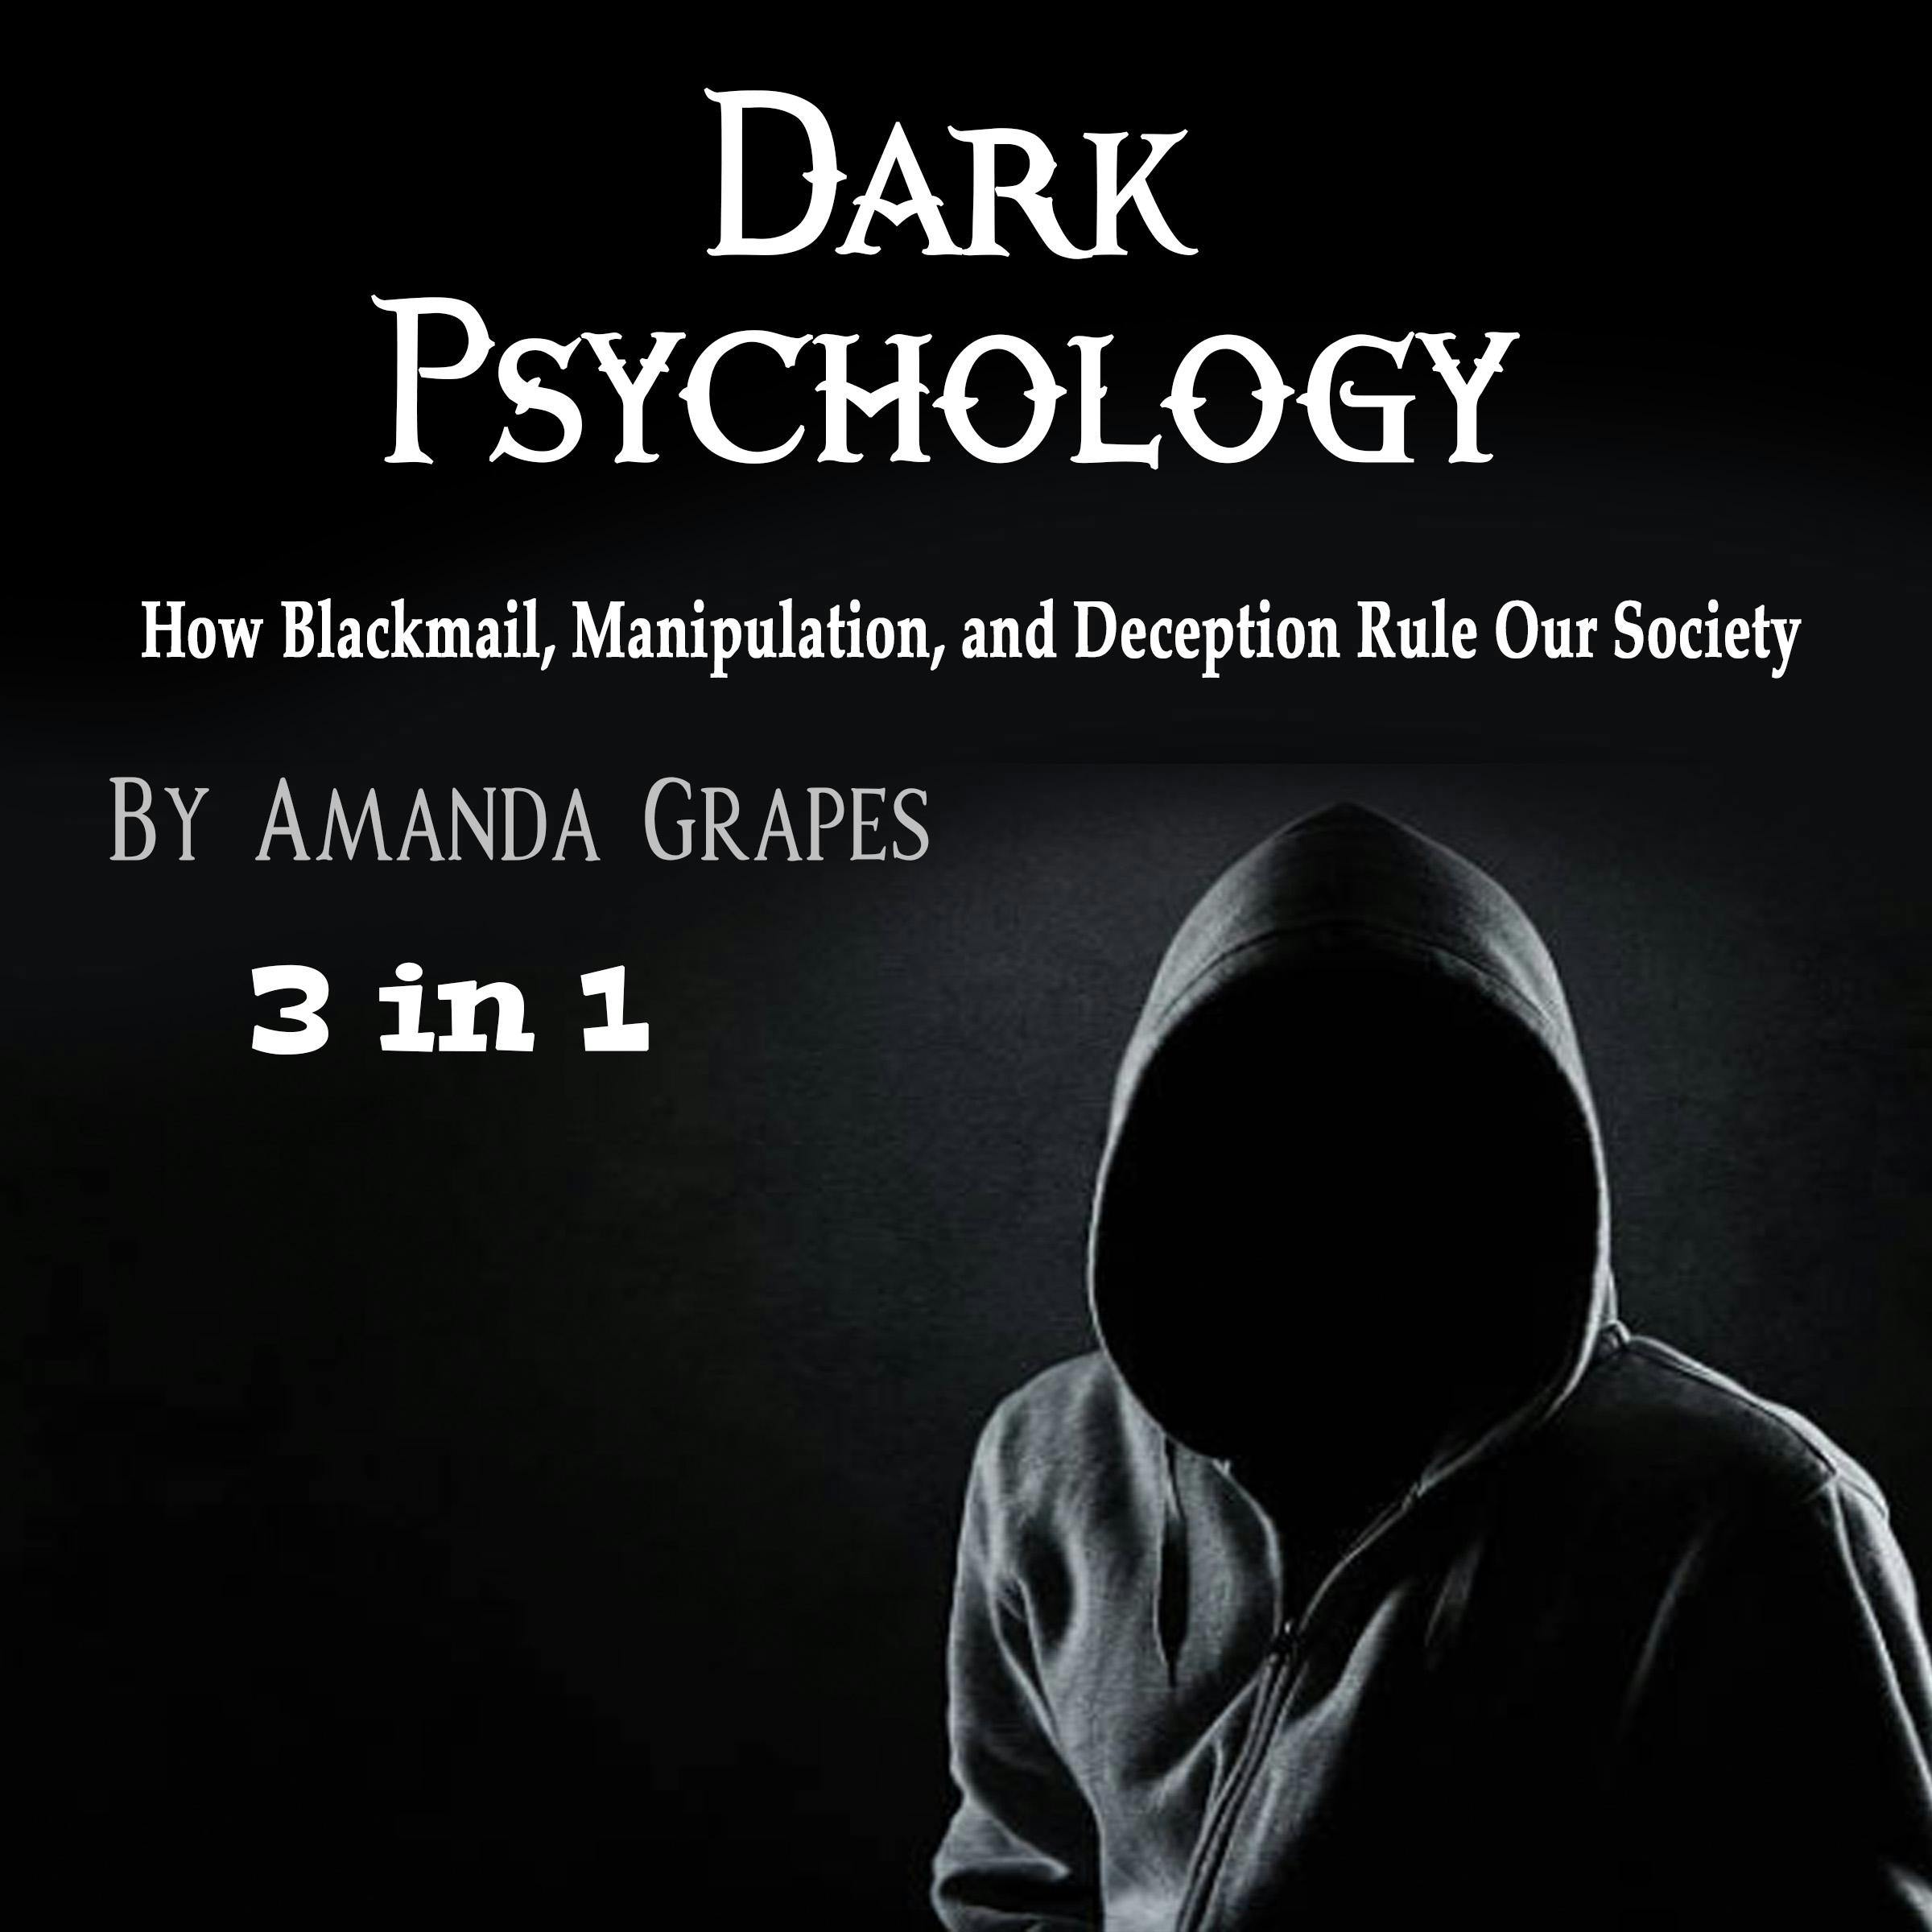 Dark Psychology: How Blackmail, Manipulation, and Deception Rule Our Society - Amanda Grapes